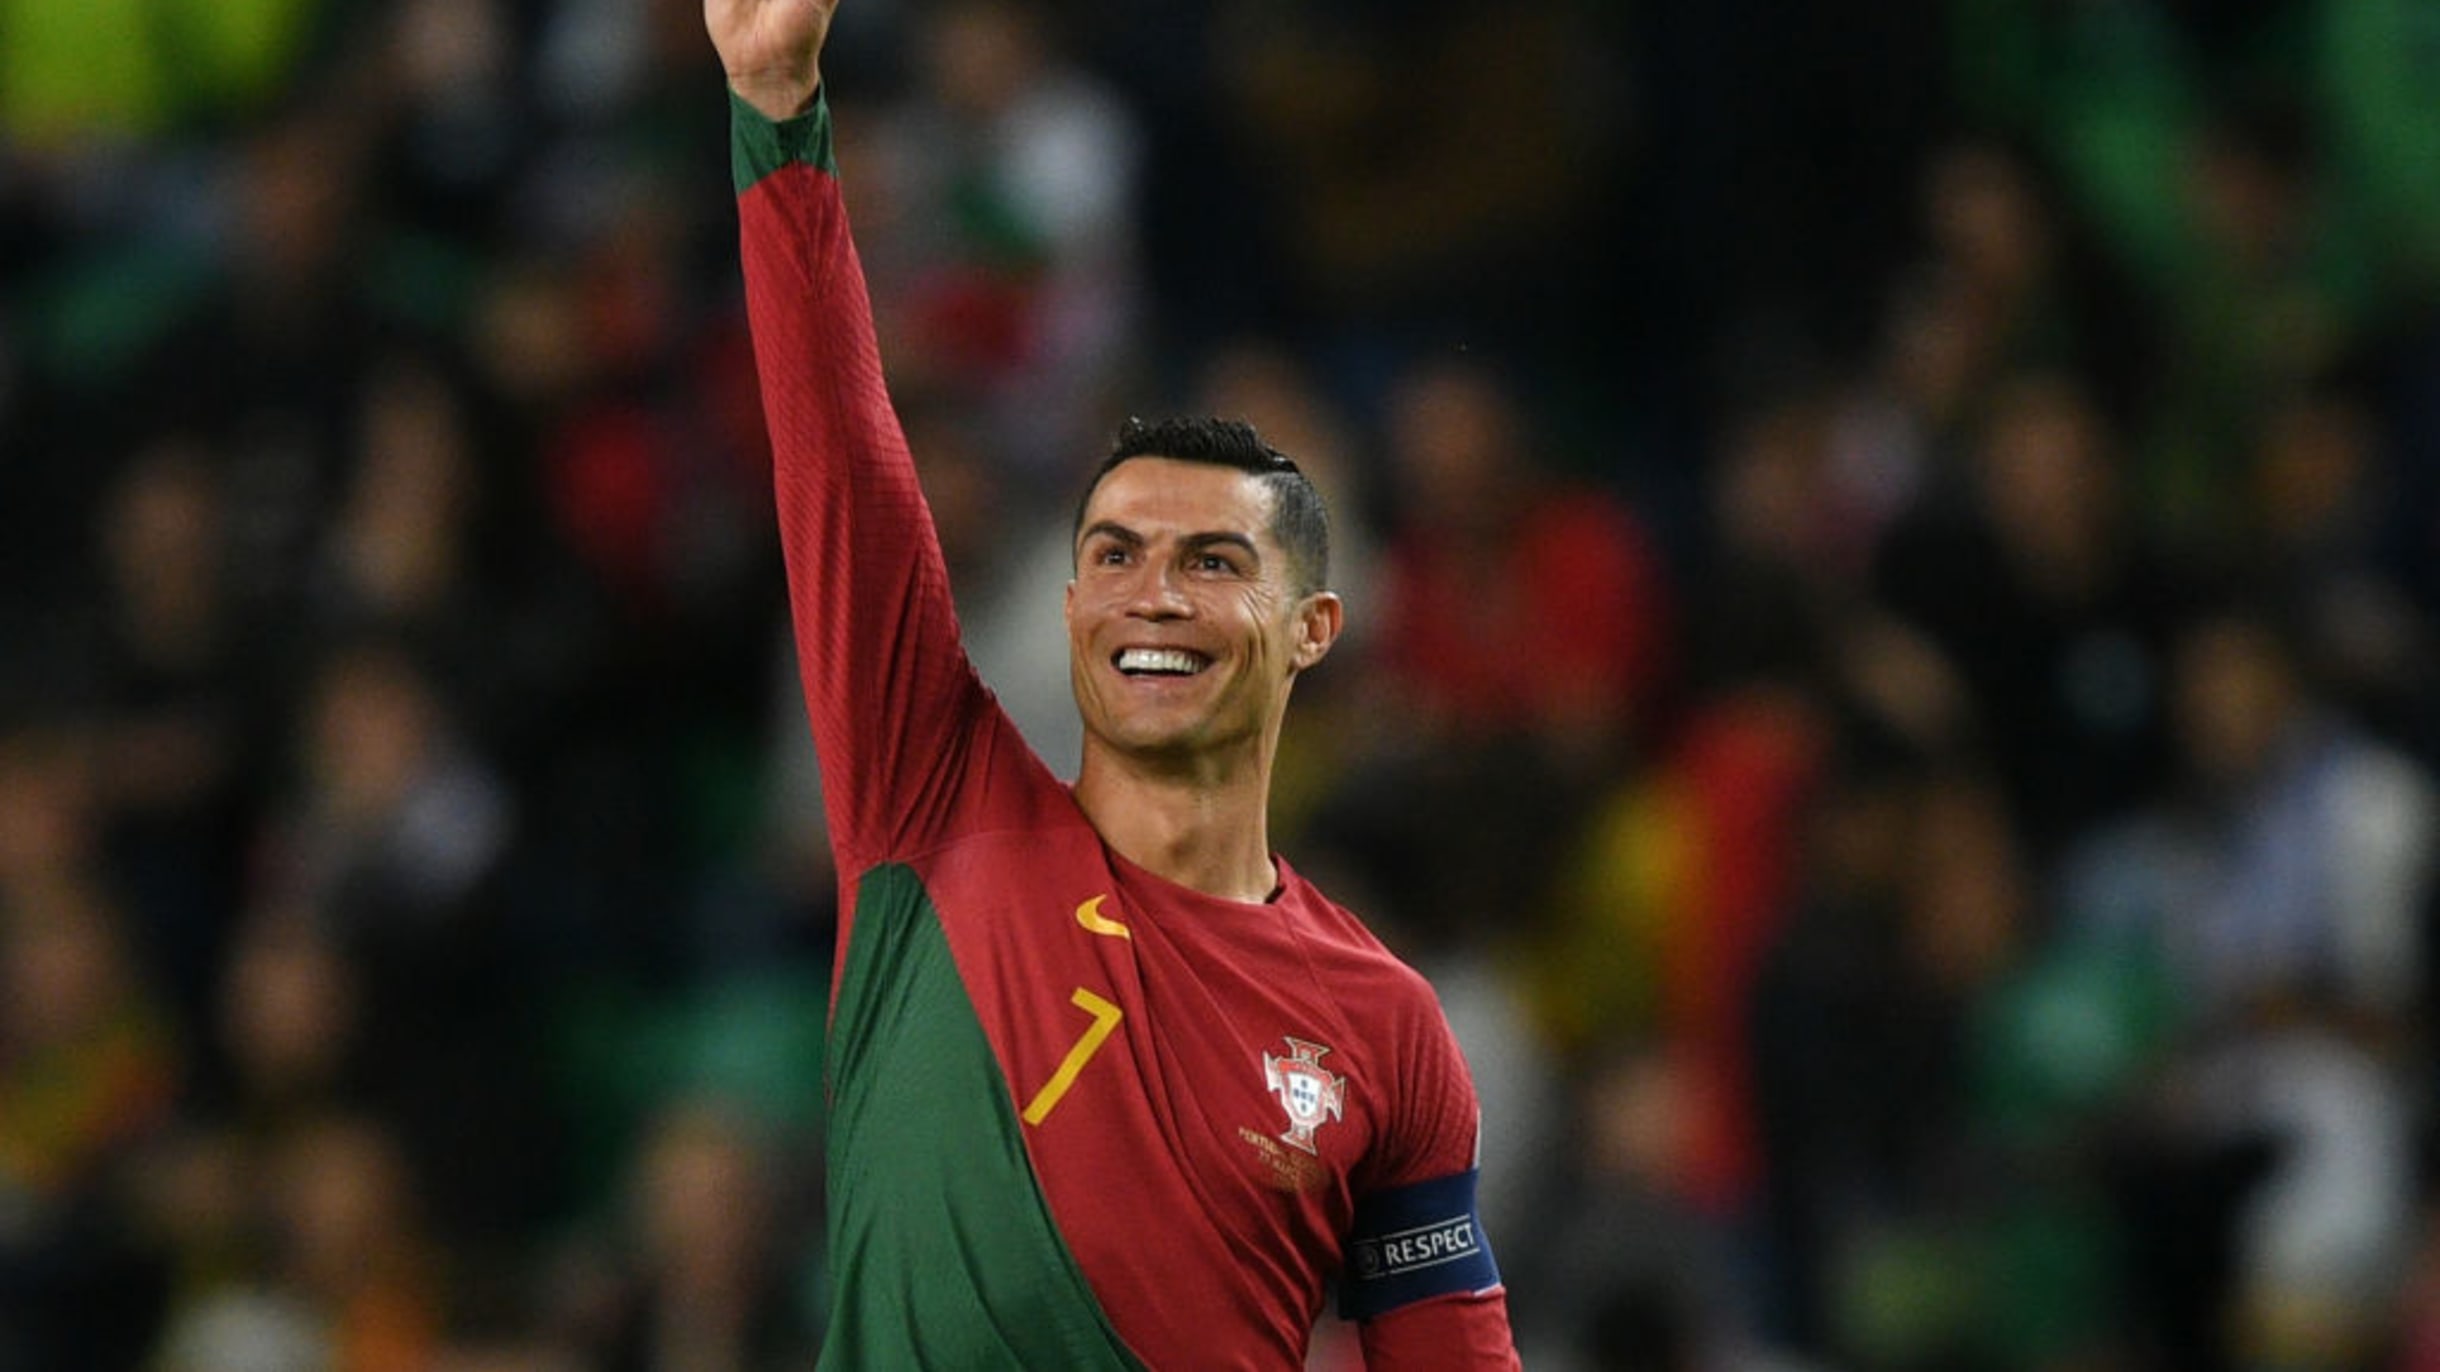 Sunday, the king plays': Cristiano Ronaldo set to play in